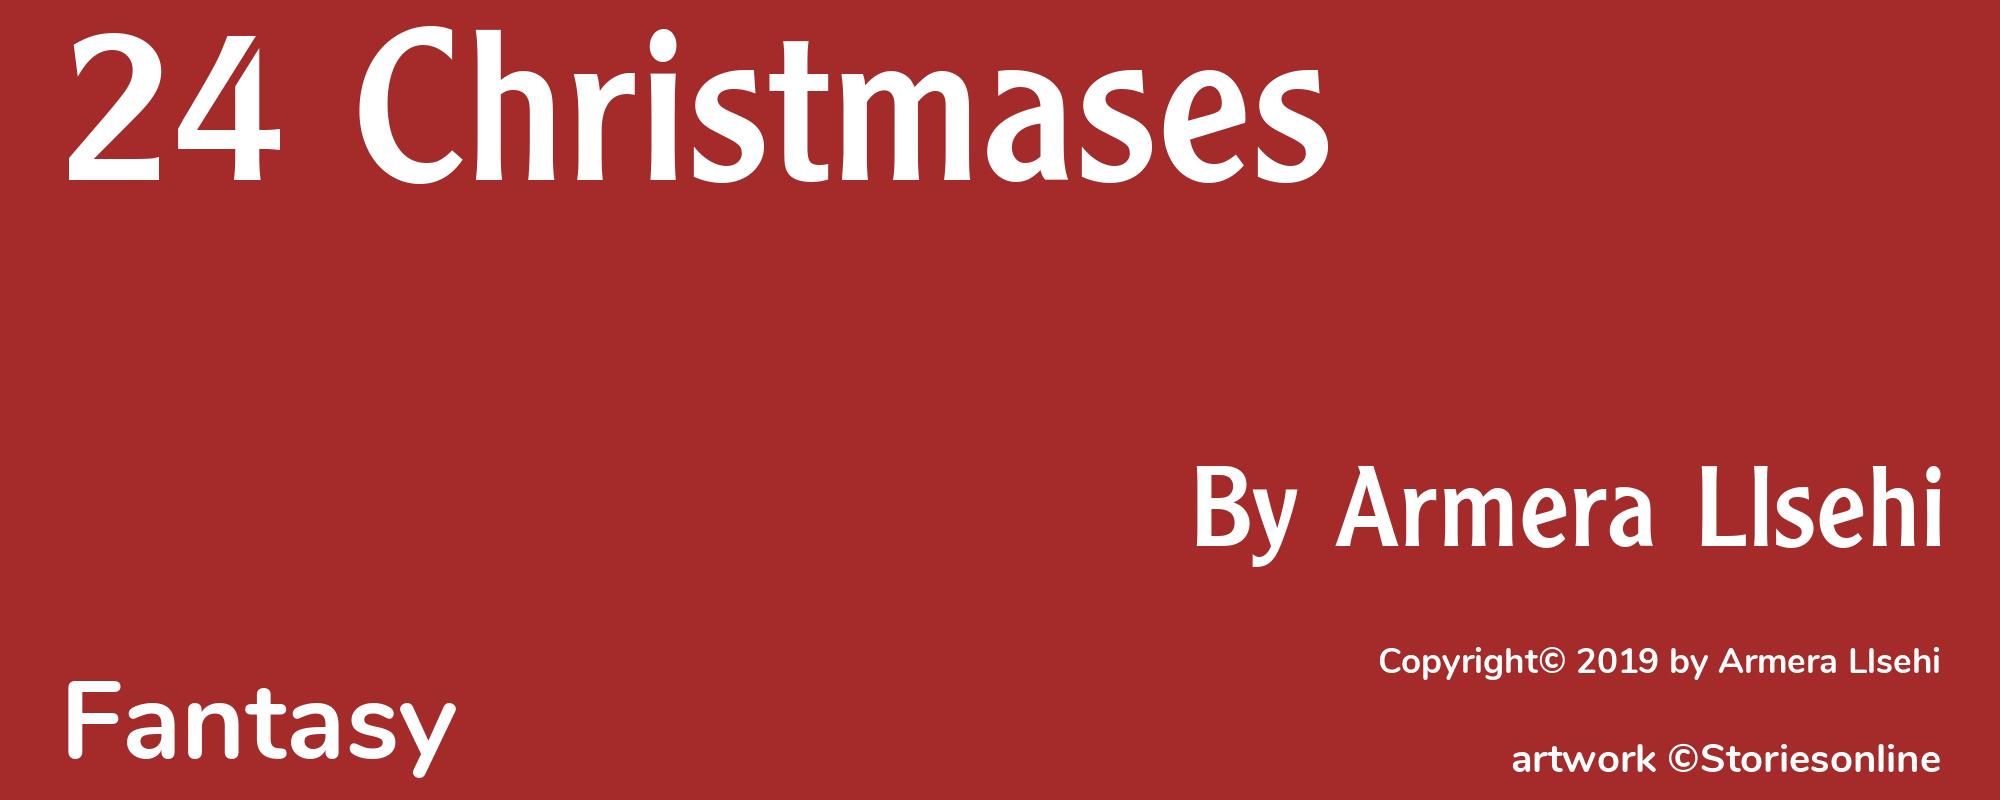 24 Christmases - Cover